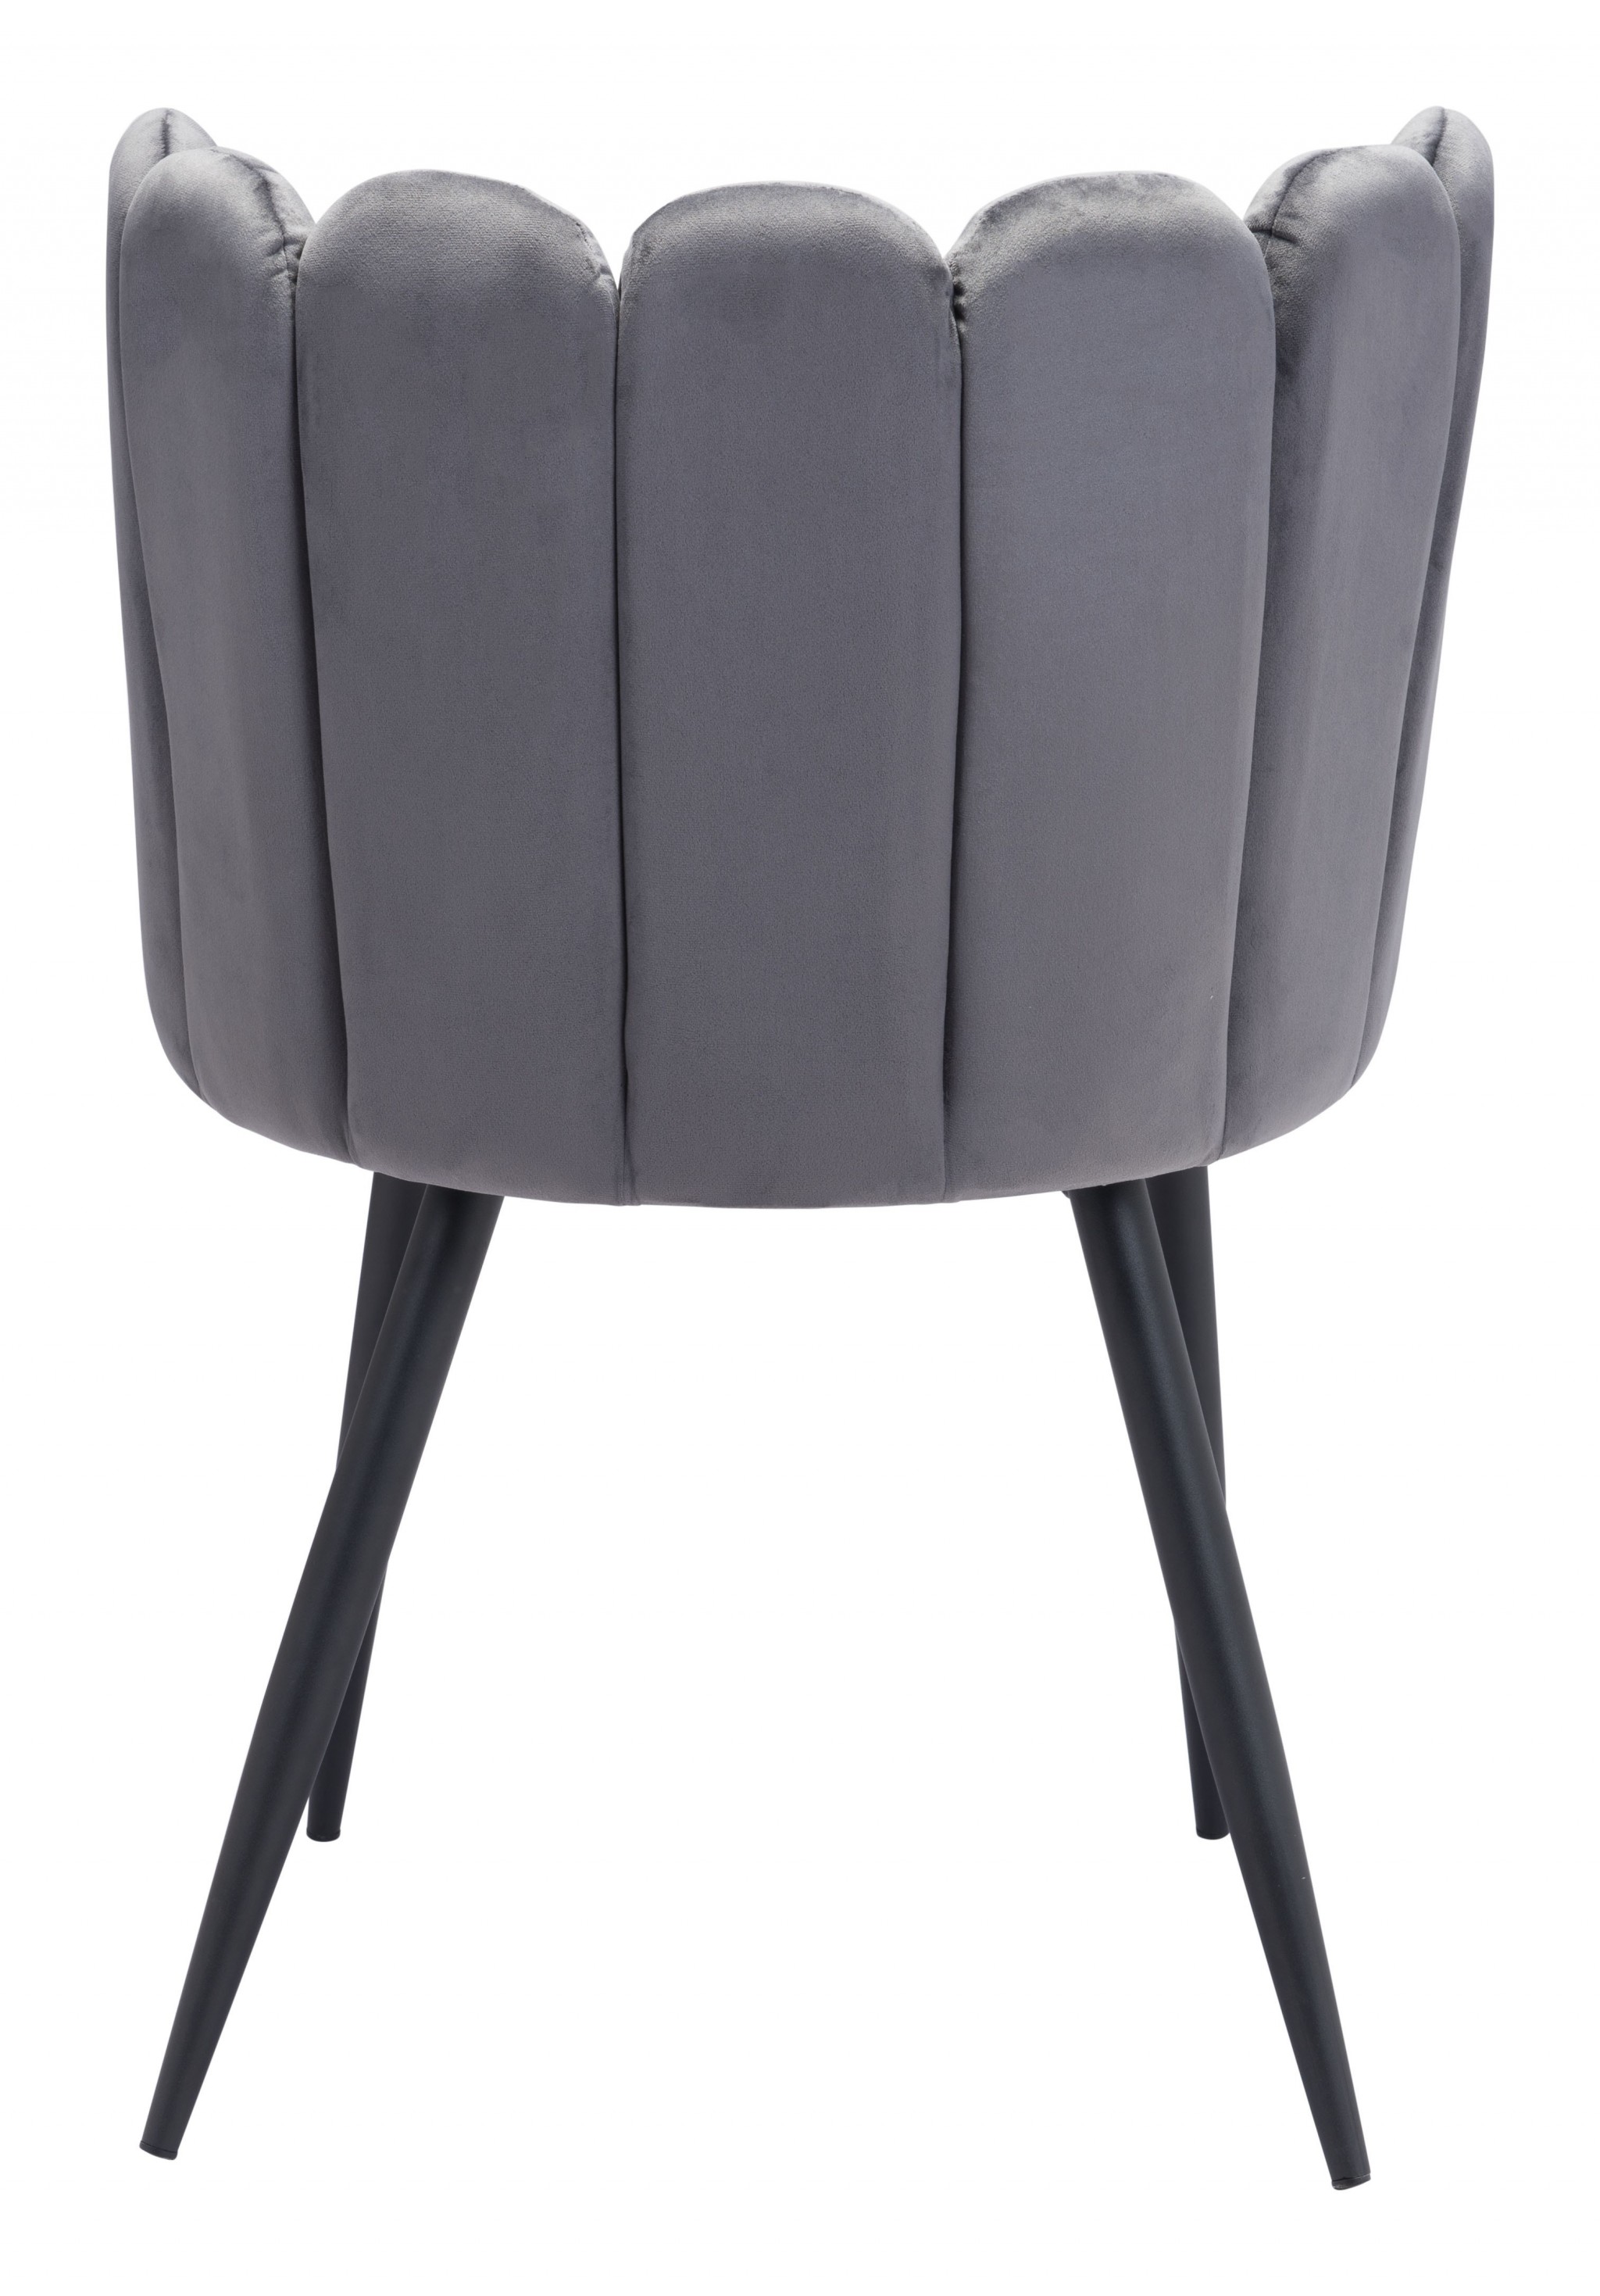 Set of Two Gray Velvet Glam Clam Dining Chairs